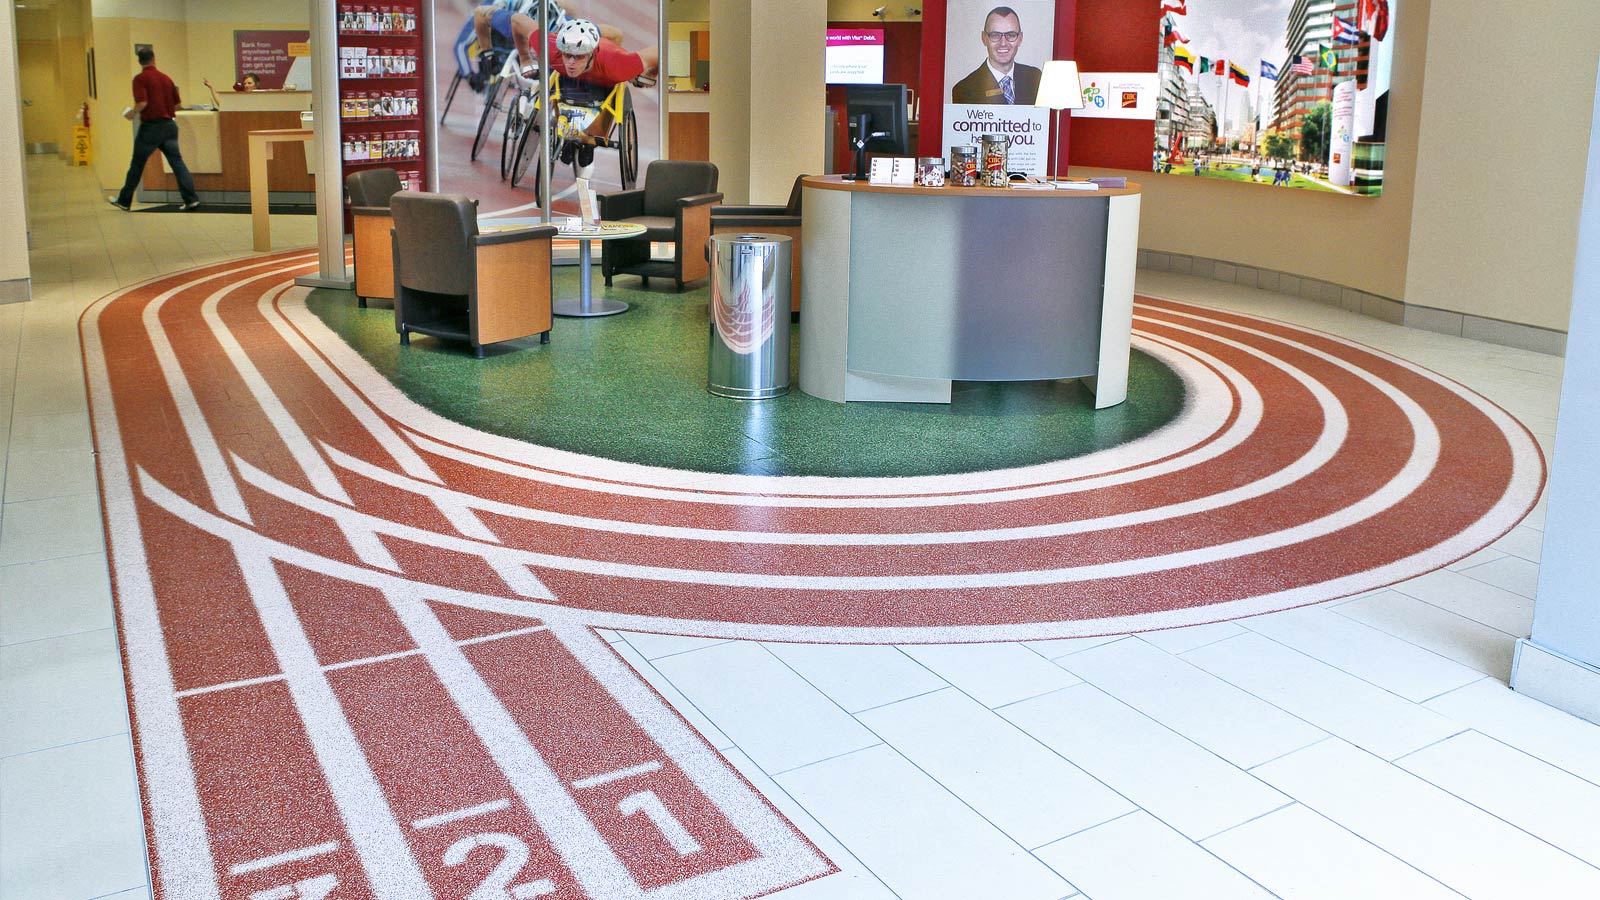 CIBC | Pan Am Branch Transformation | Event, Experiential